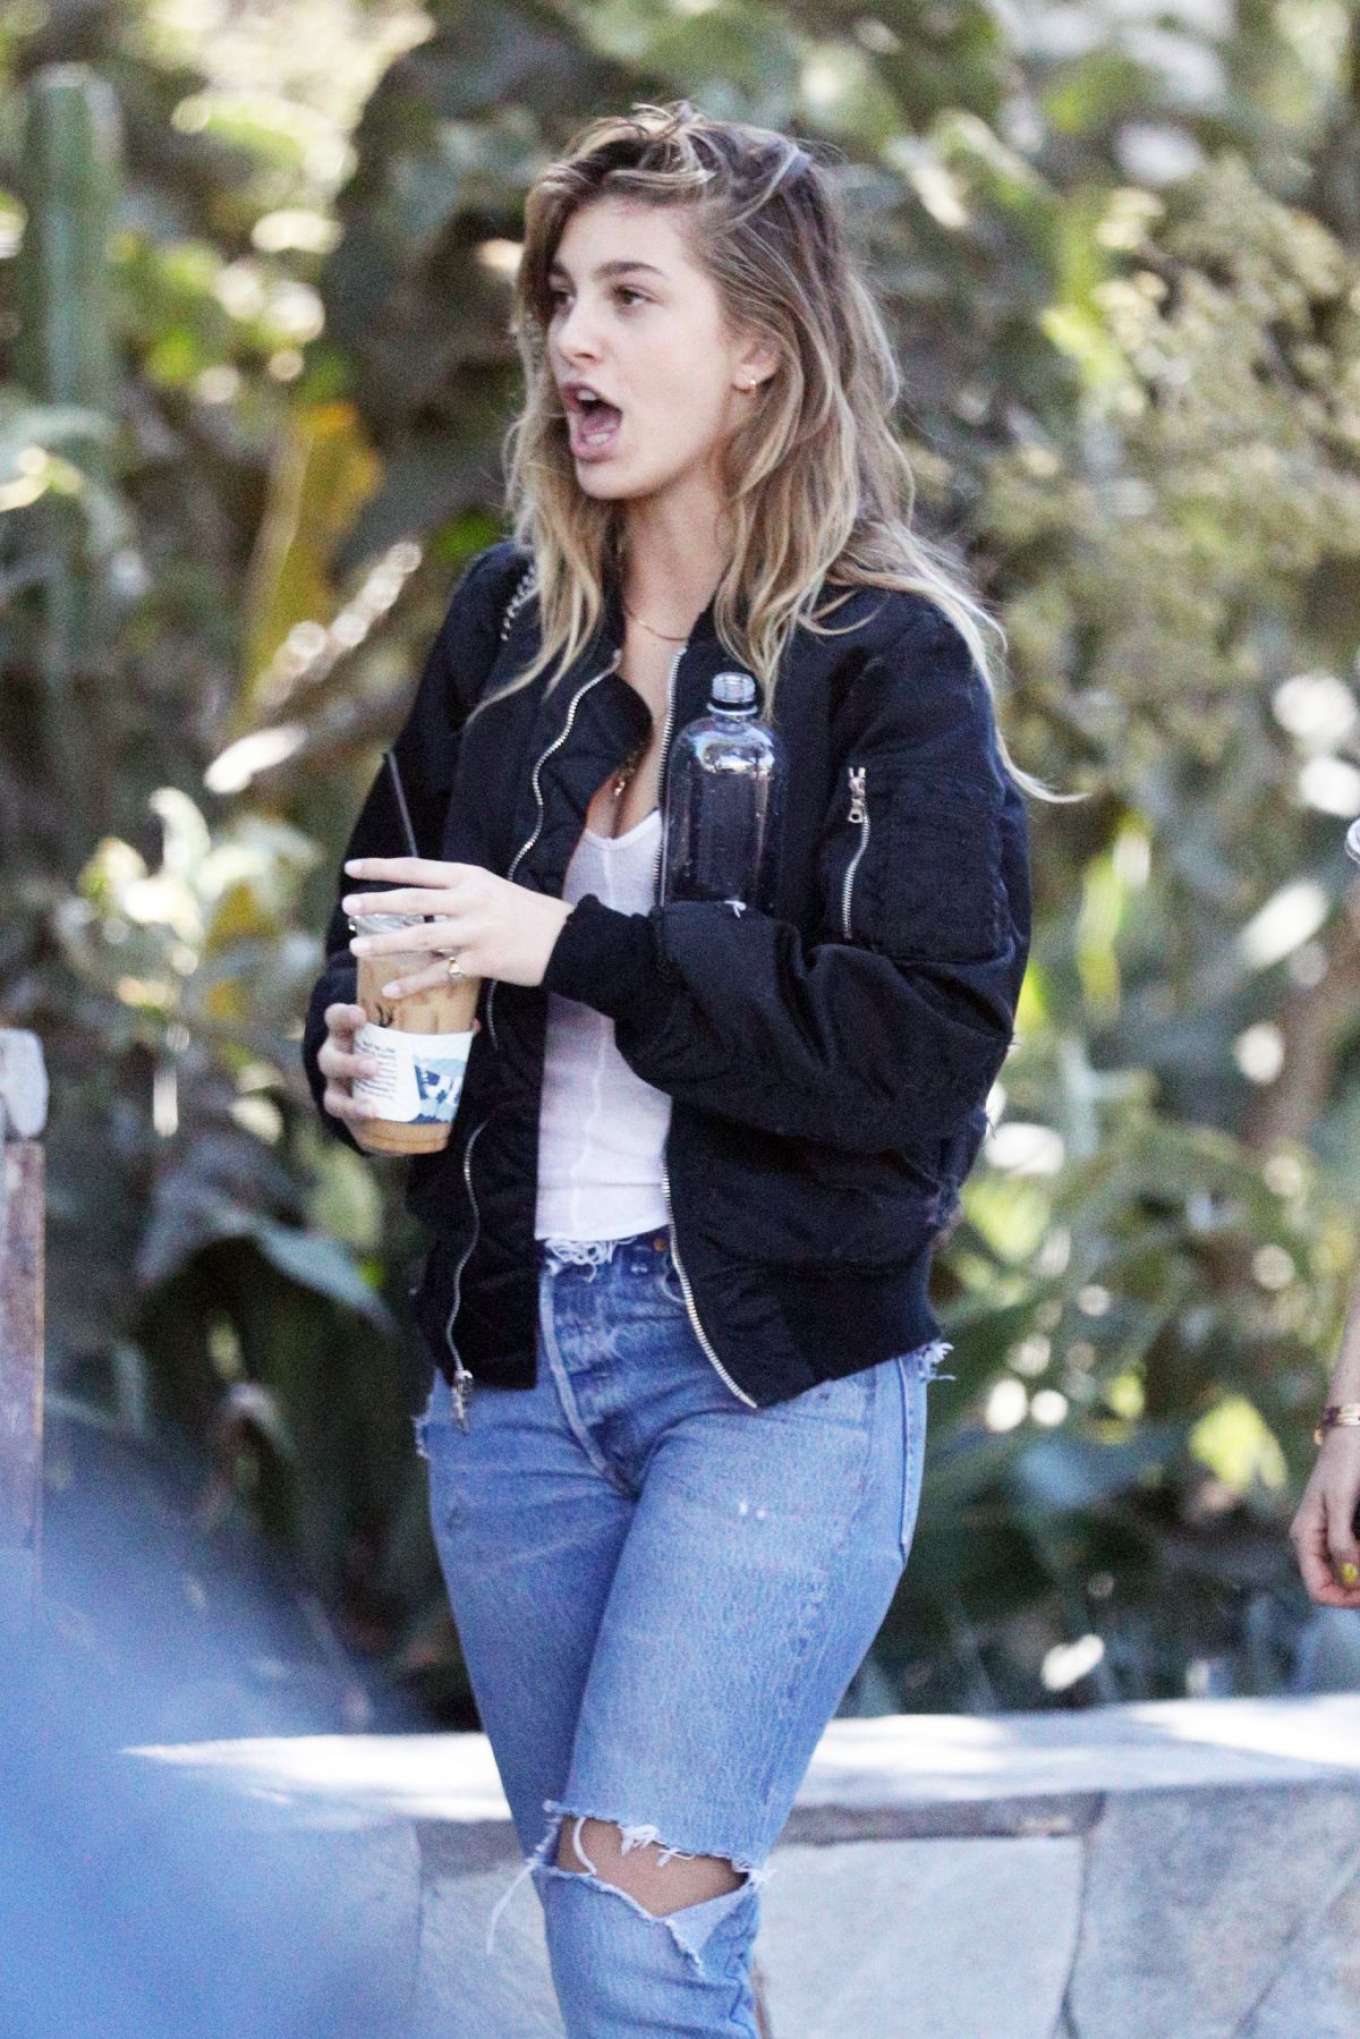 Camila Morrone in Jeans at a Park in Los Angeles – GotCeleb1360 x 2039